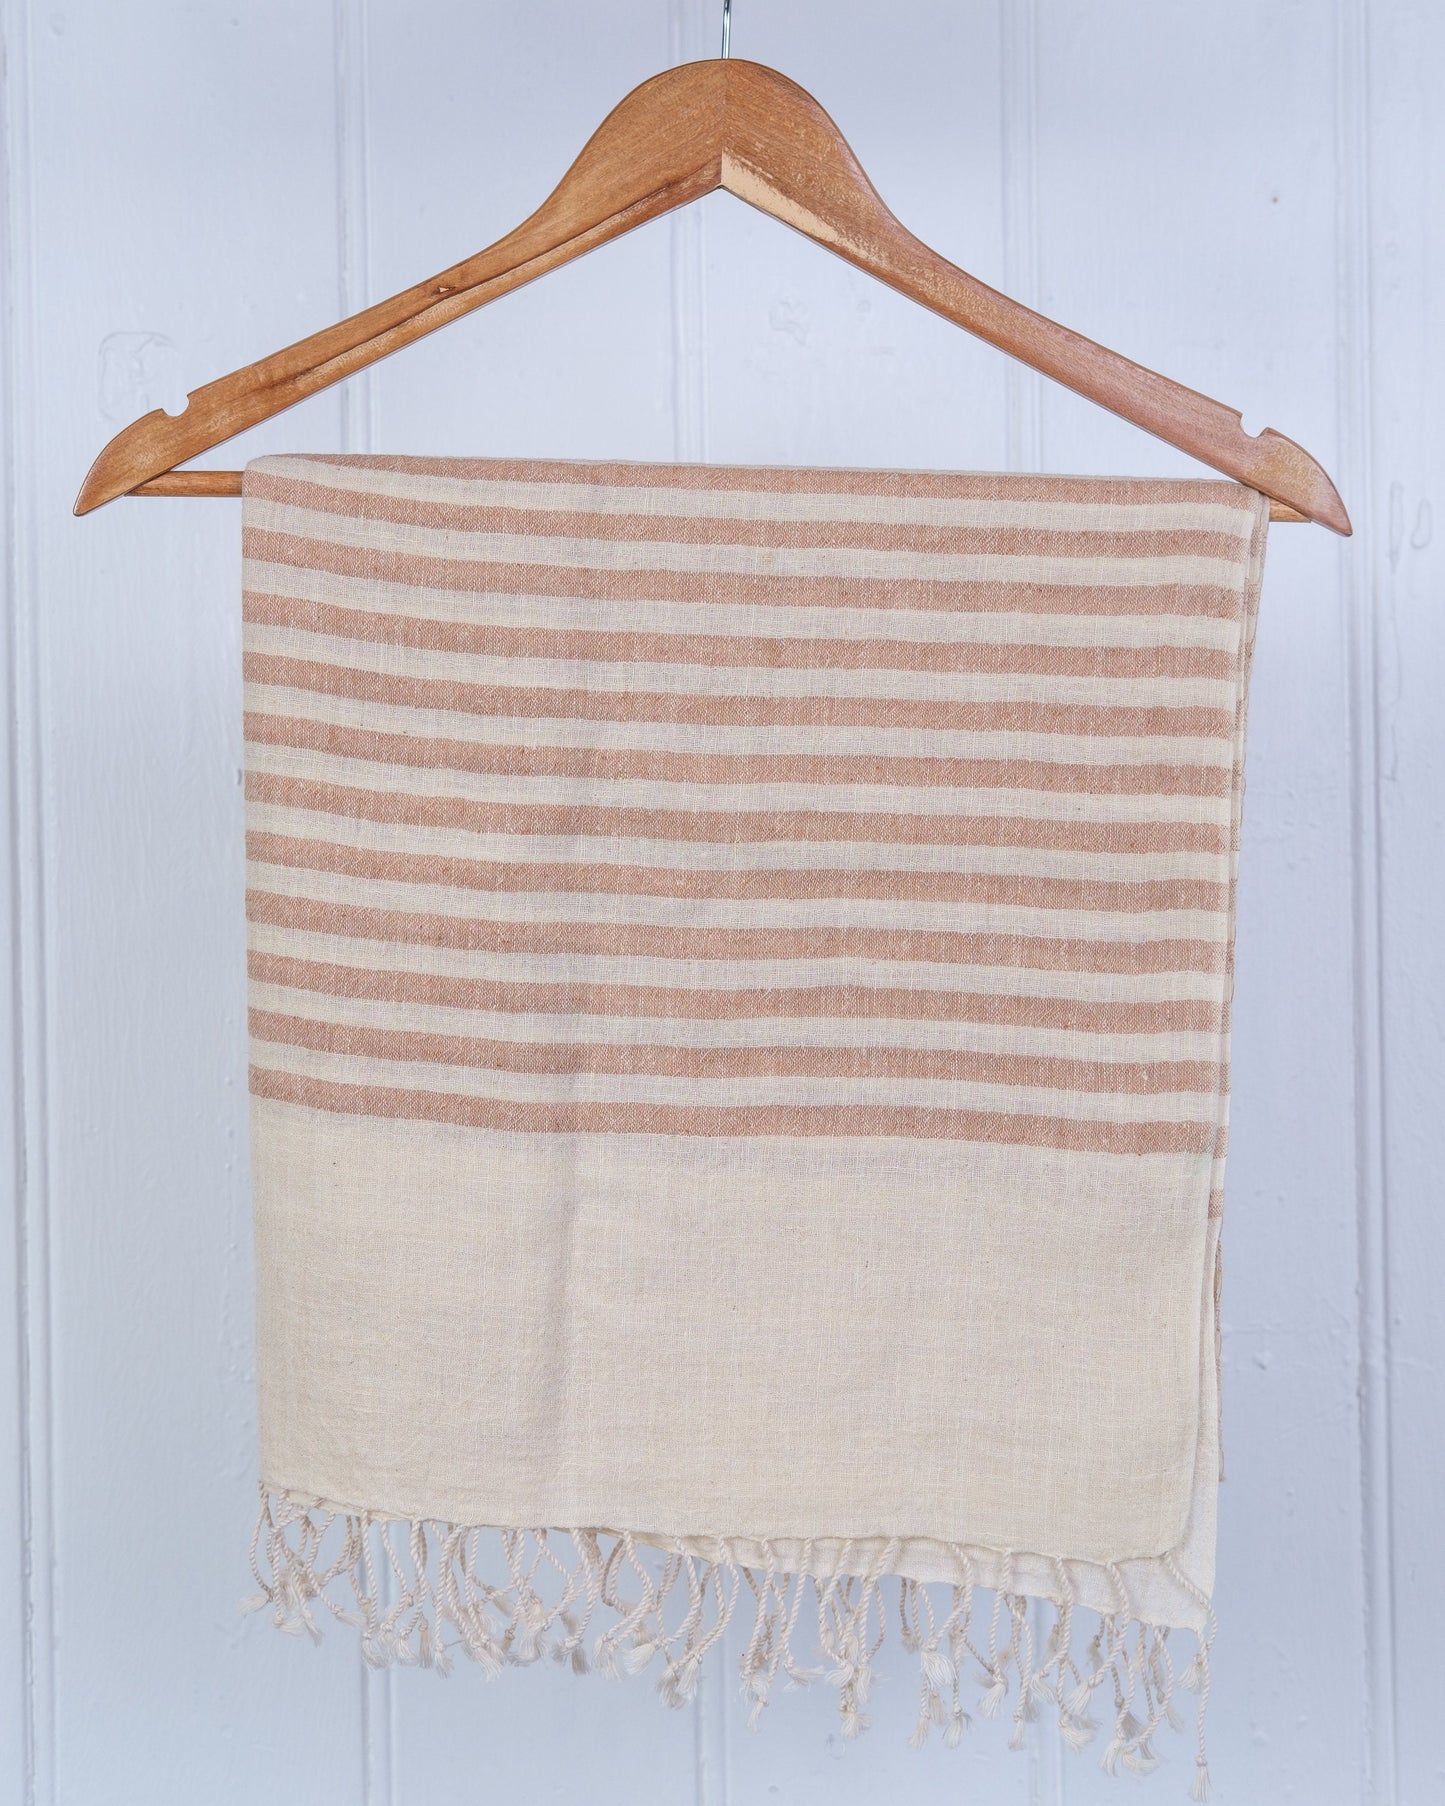 Organic Hemp and Cotton Shawl, available in orange, blue, green and grey